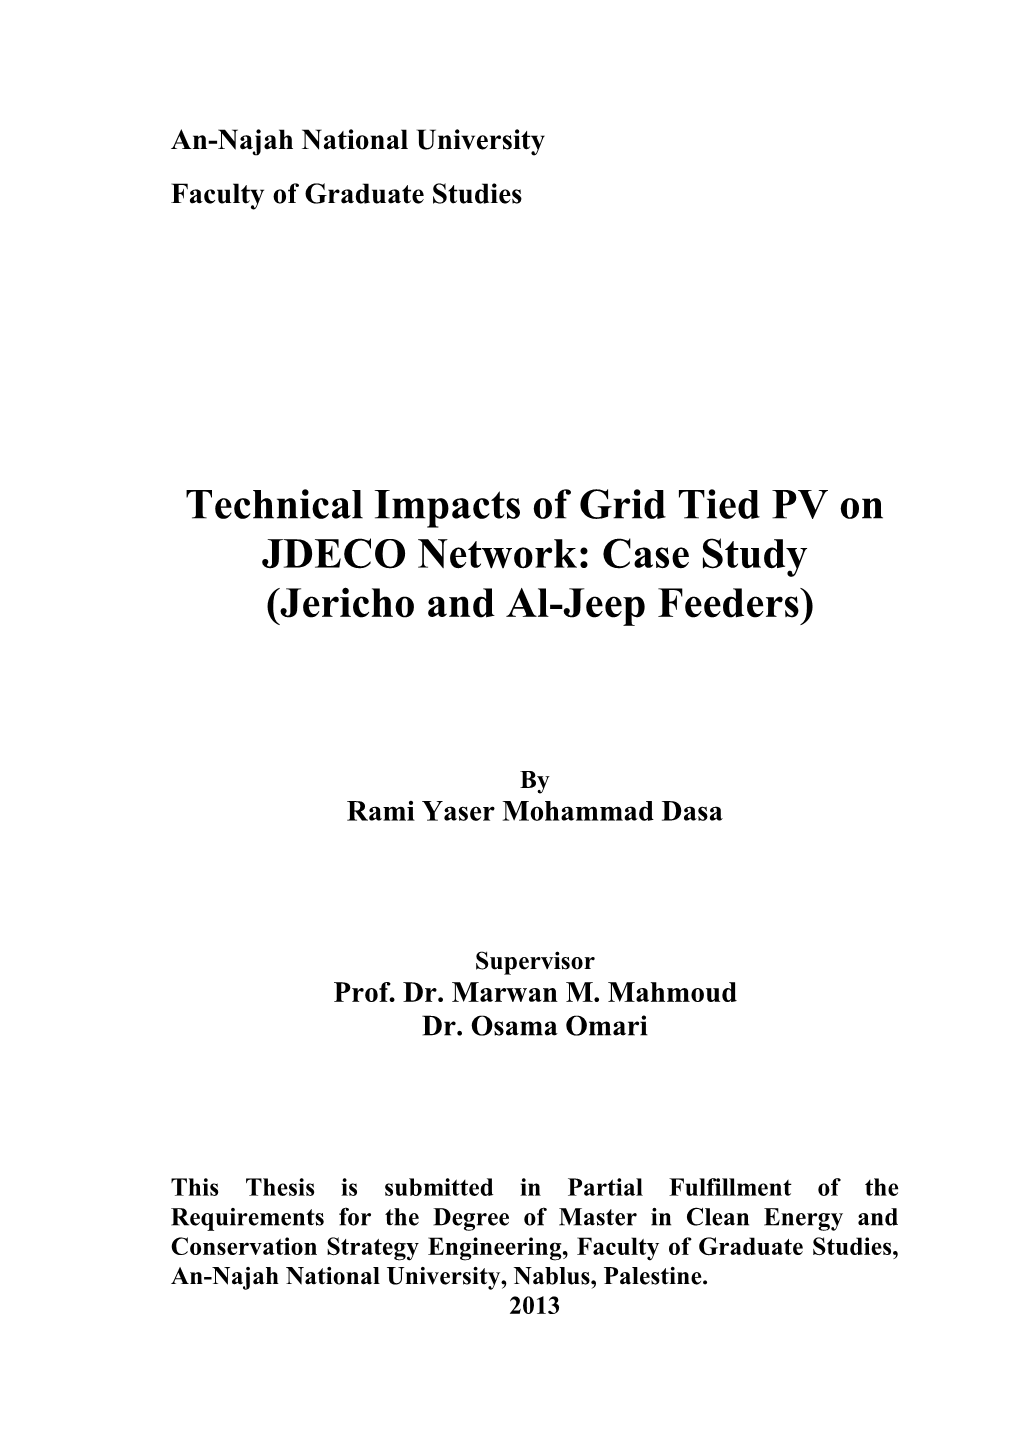 Technical Impacts of Grid Tied PV on JDECO Network: Case Study (Jericho and Al-Jeep Feeders)